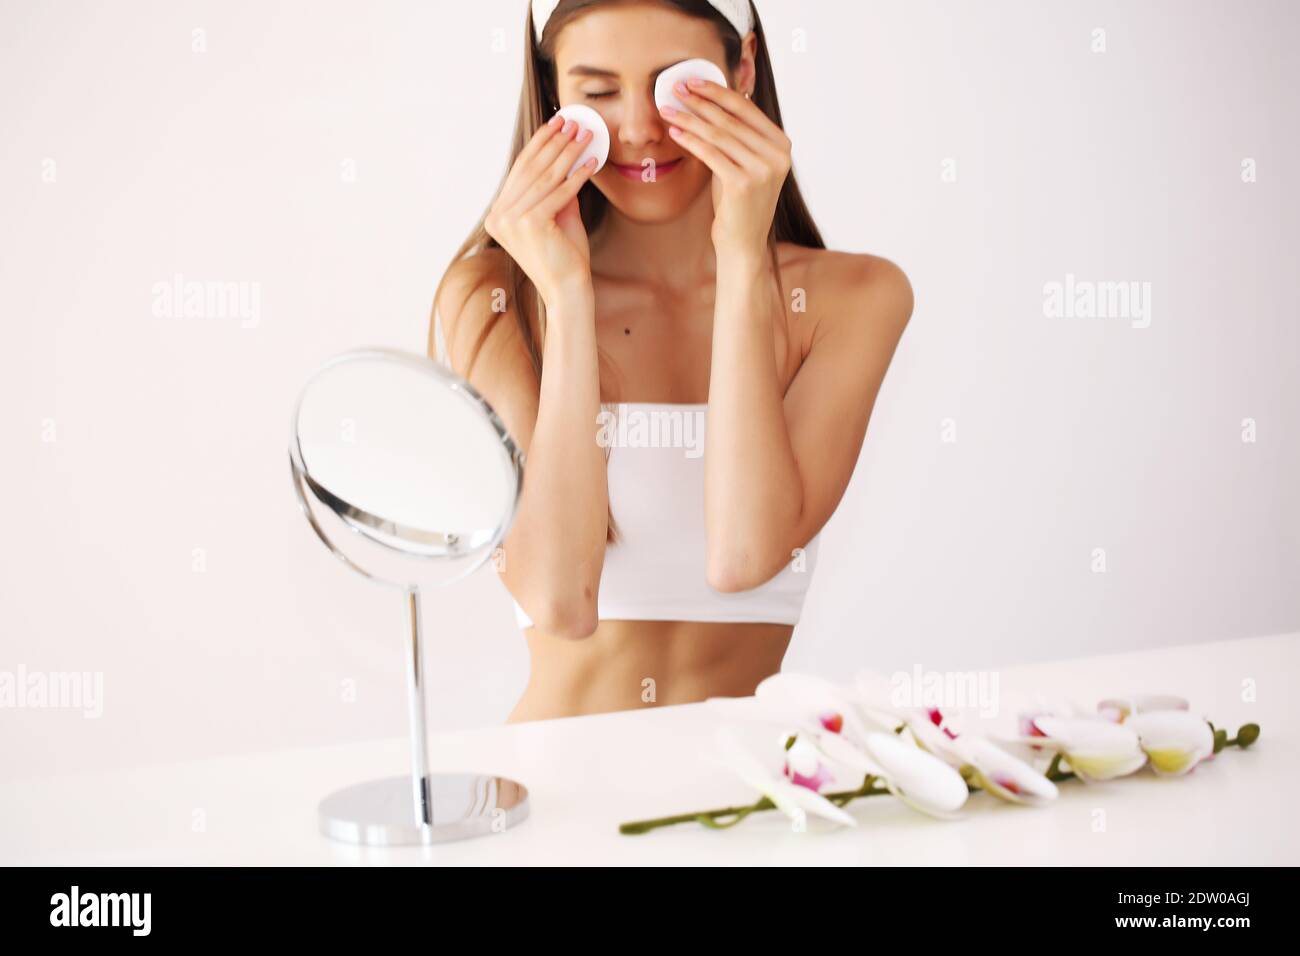 Young brunette girl takes care of her skin, standing in front of a mirror, enjoying beauty treatments for herself, smiling tenderly. Stock Photo